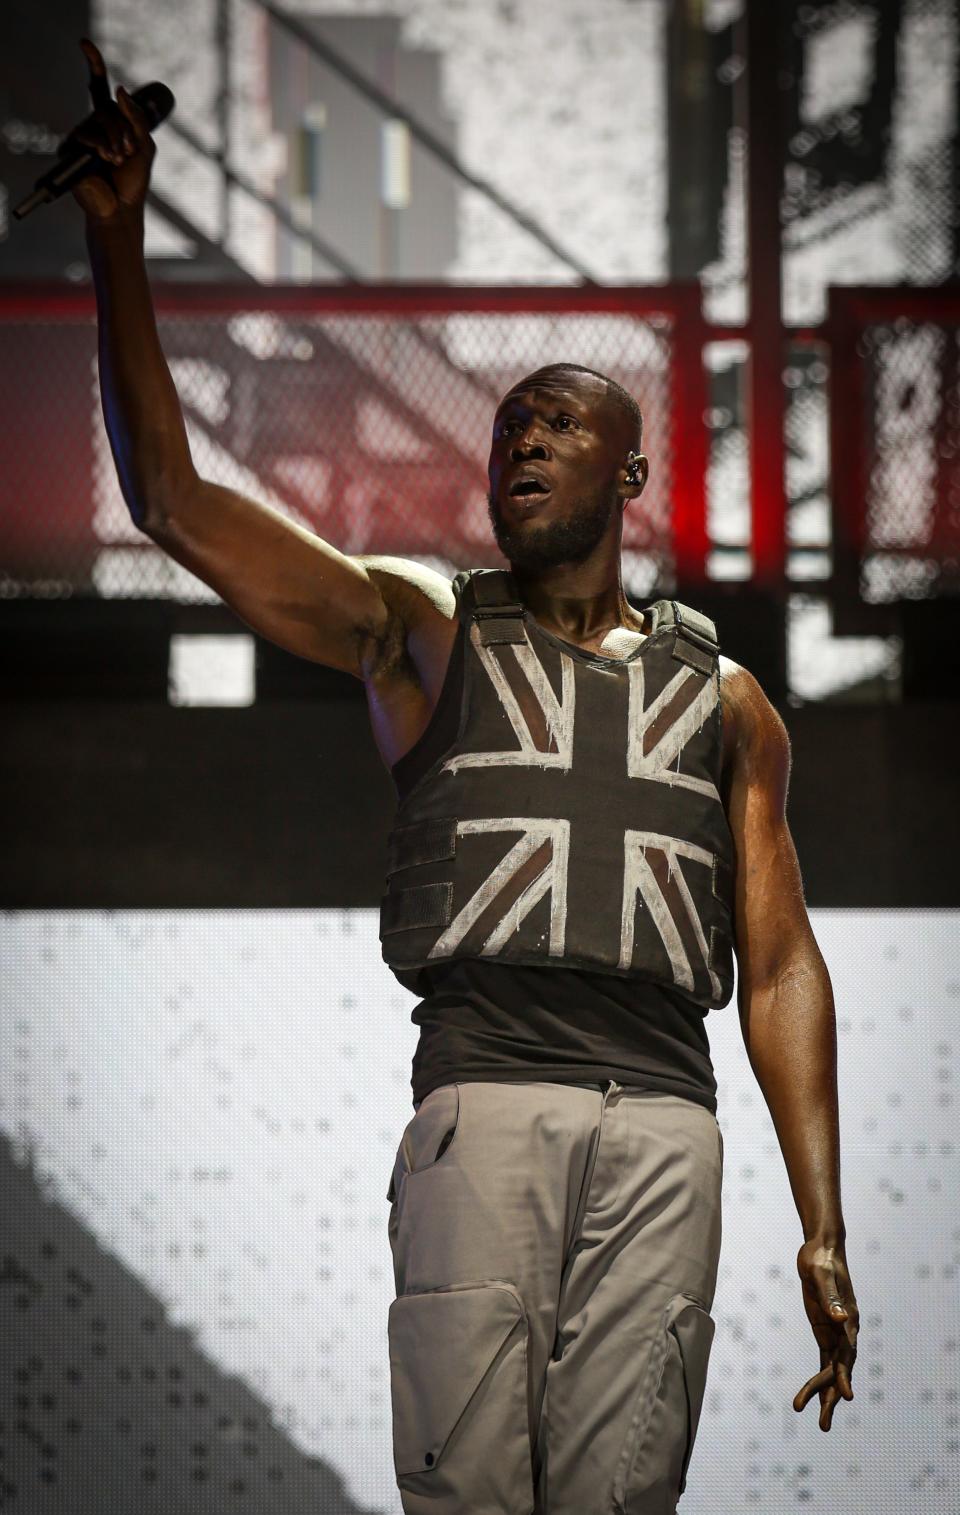 Stormzy, wearing a stab vest designed by the artist Banksy, performs on the Pyramid Stage at the 2019 Glastonbury Festival.